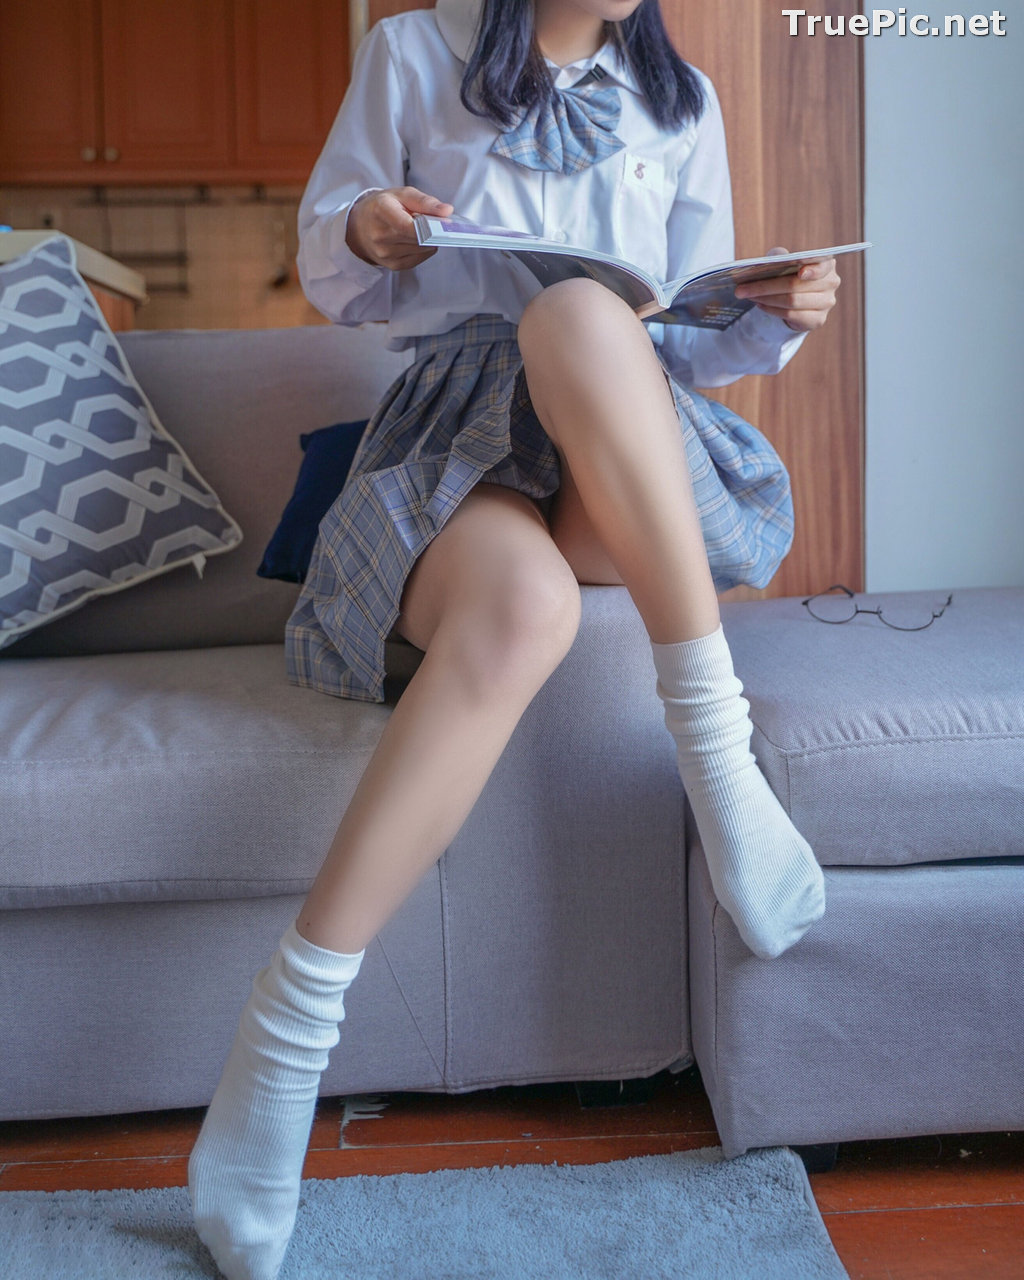 Image [MTCos] 喵糖映画 Vol.047 – Chinese Cute Model – Sexy Student Uniform - TruePic.net - Picture-43